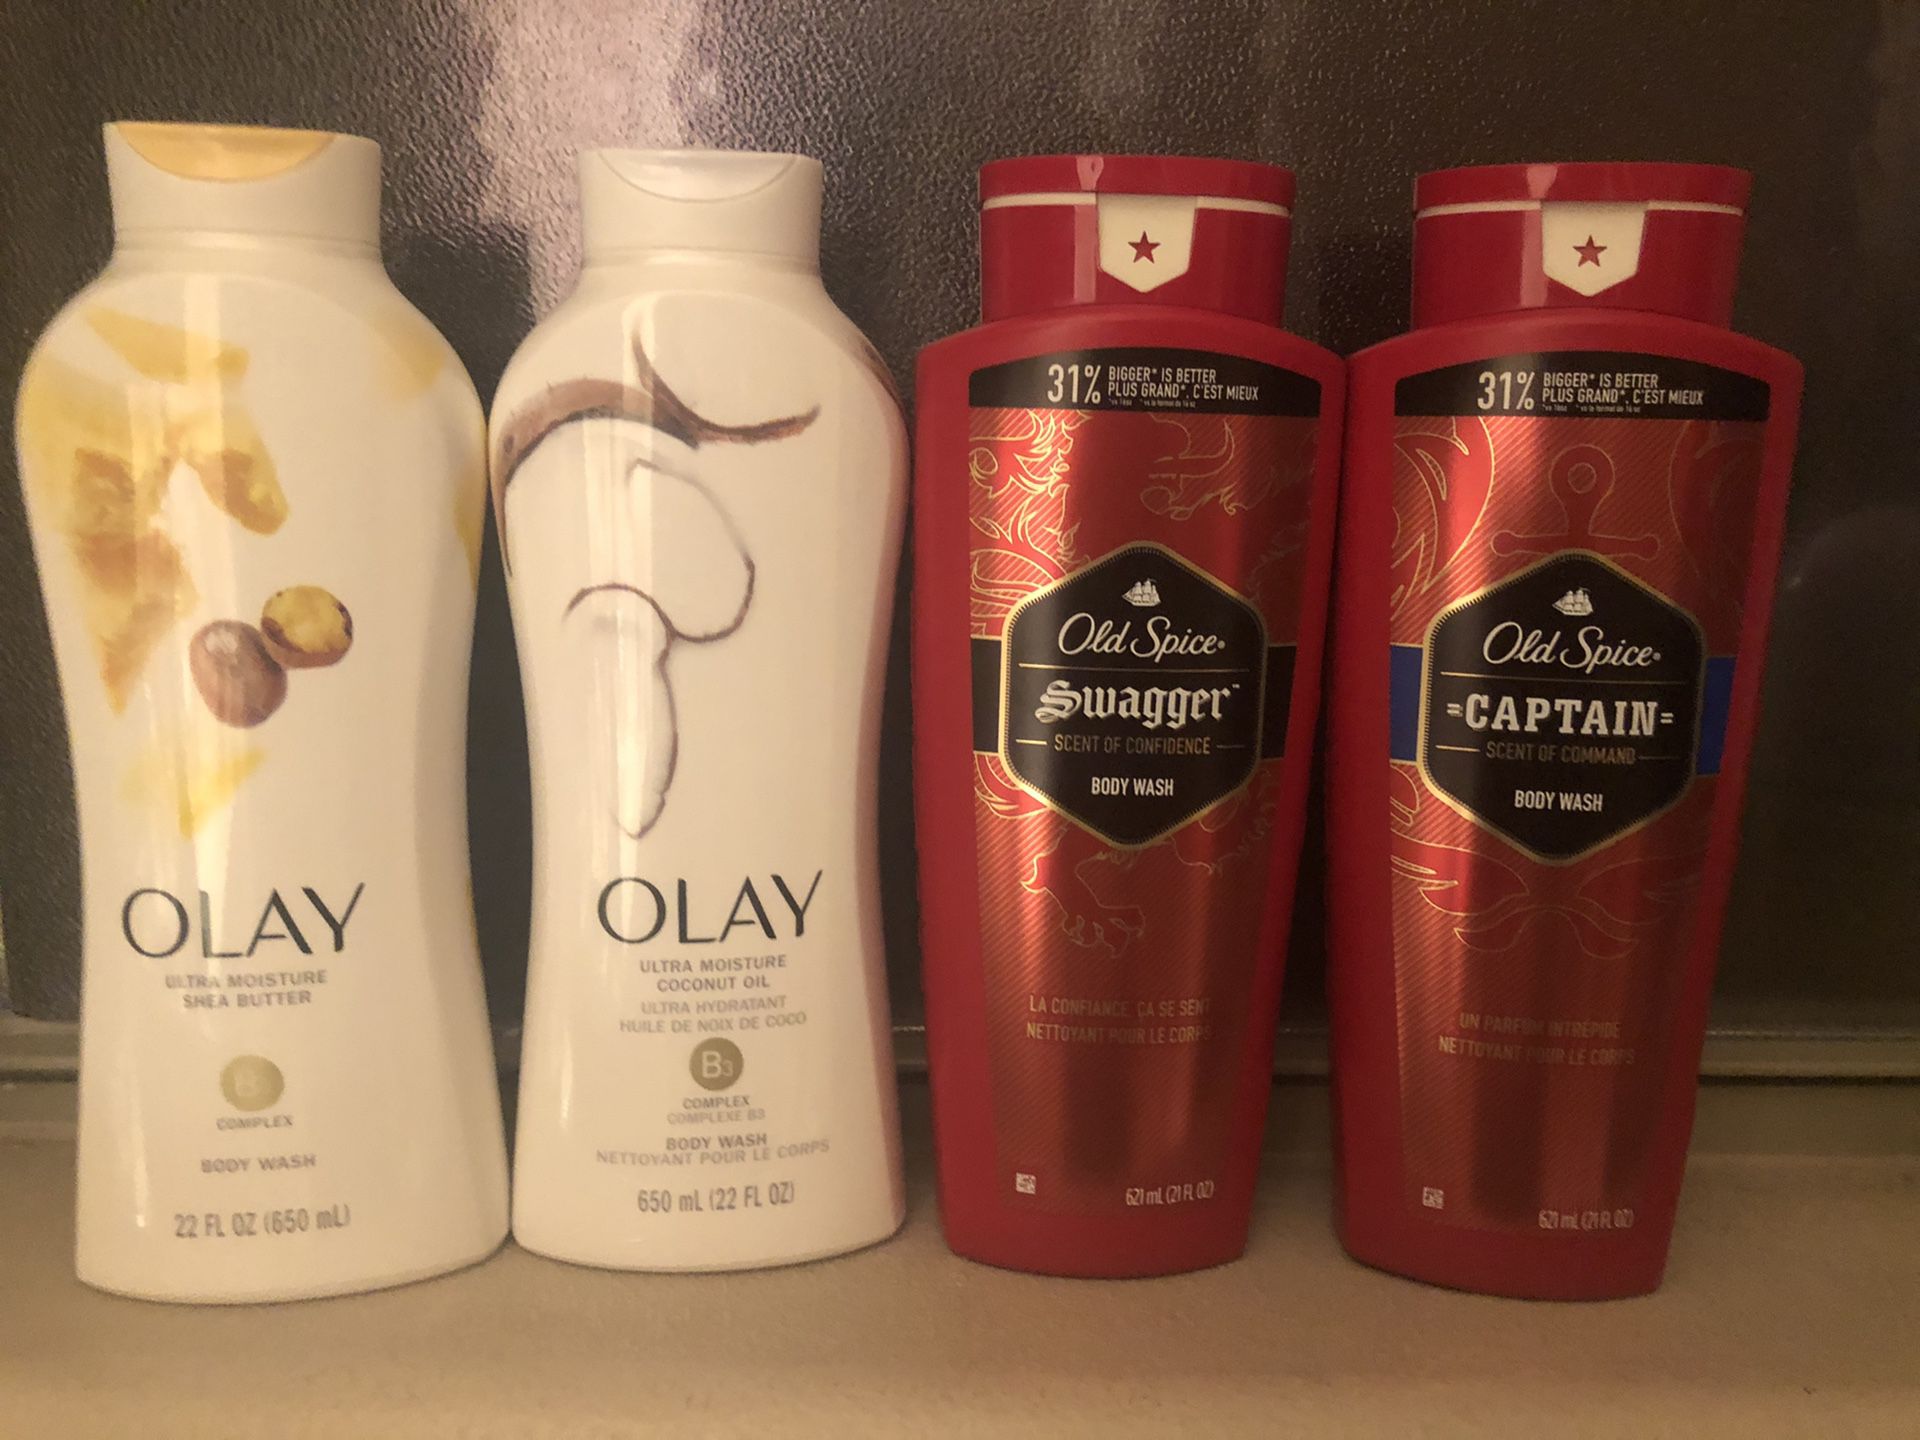 Olay and old spice body wash